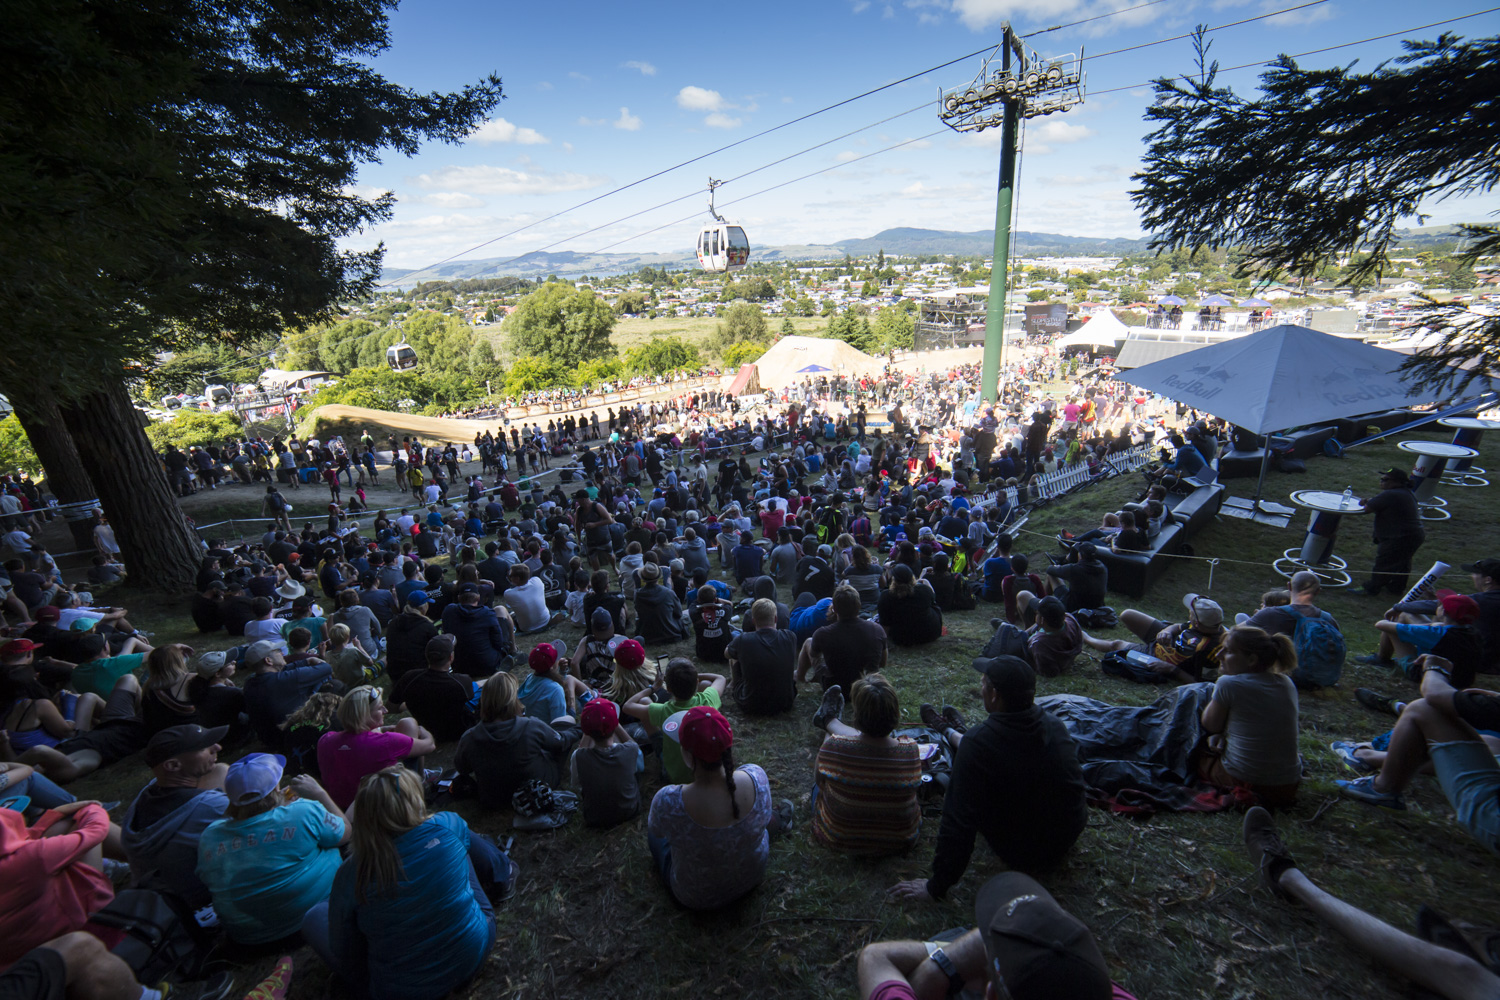 Huge crowd in for Saturday's blue ribbon event - the McGazza Slopestyle